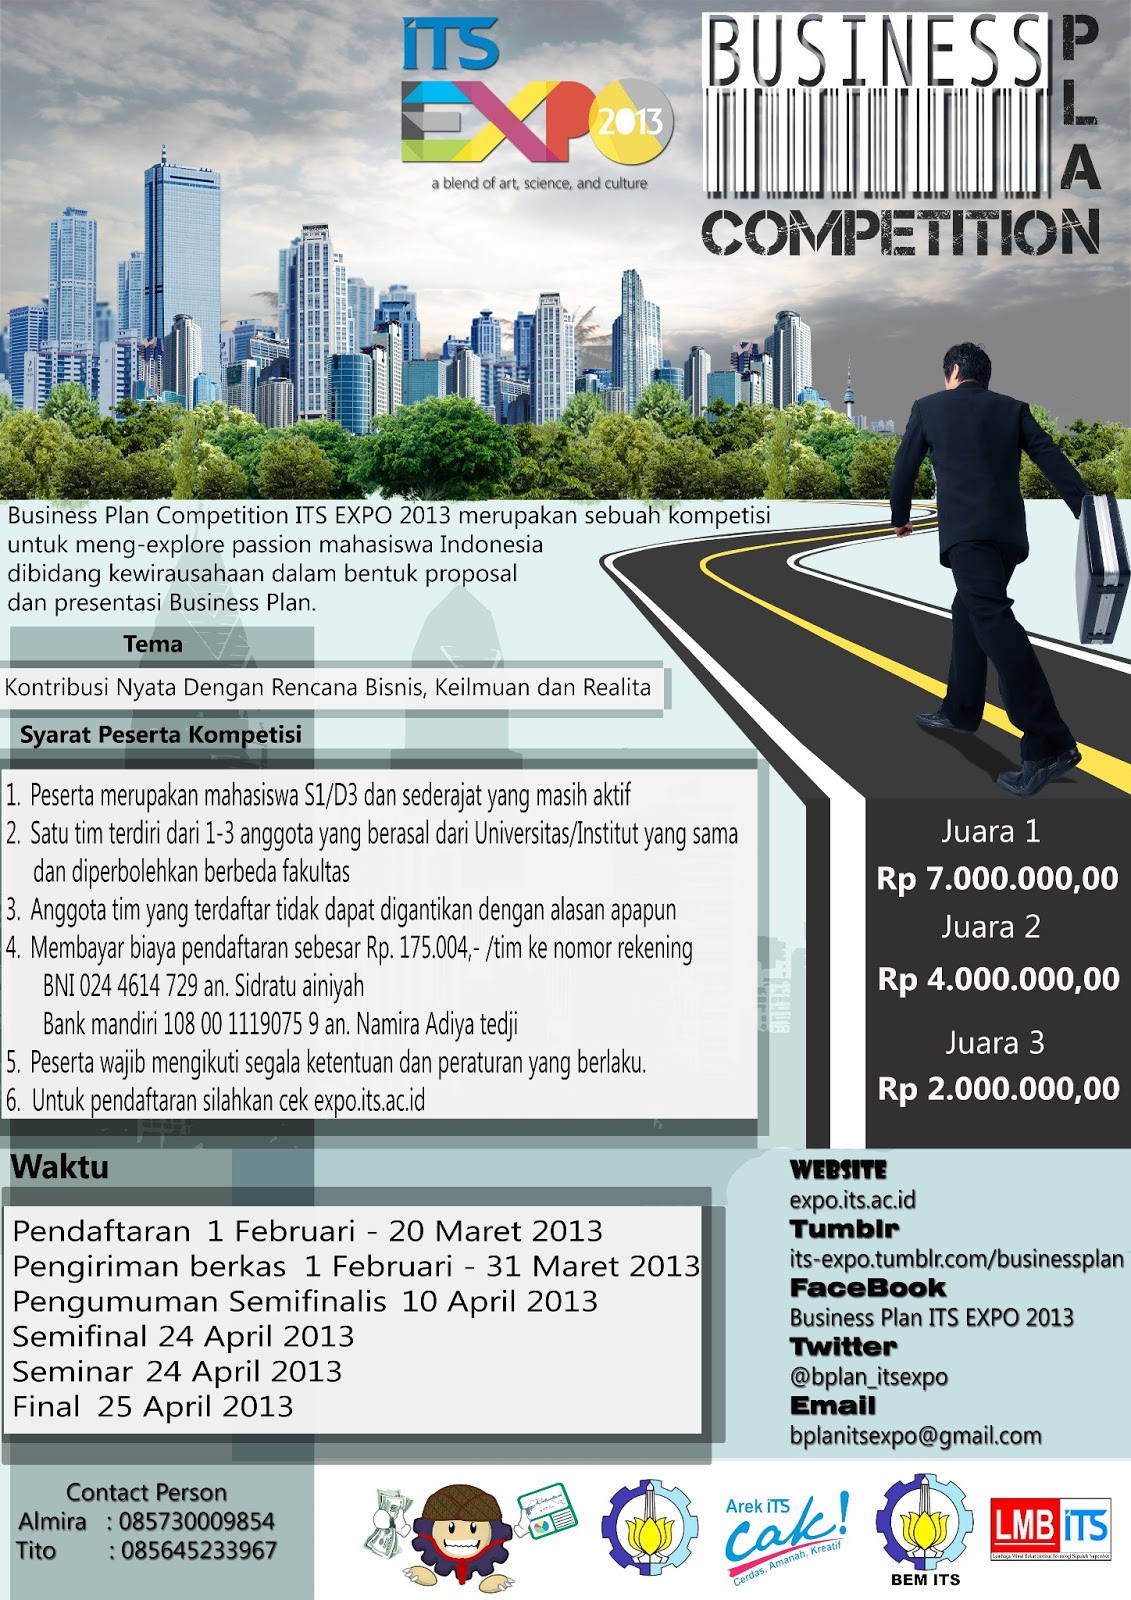 Business Plan Competition ITS EXPO 2013